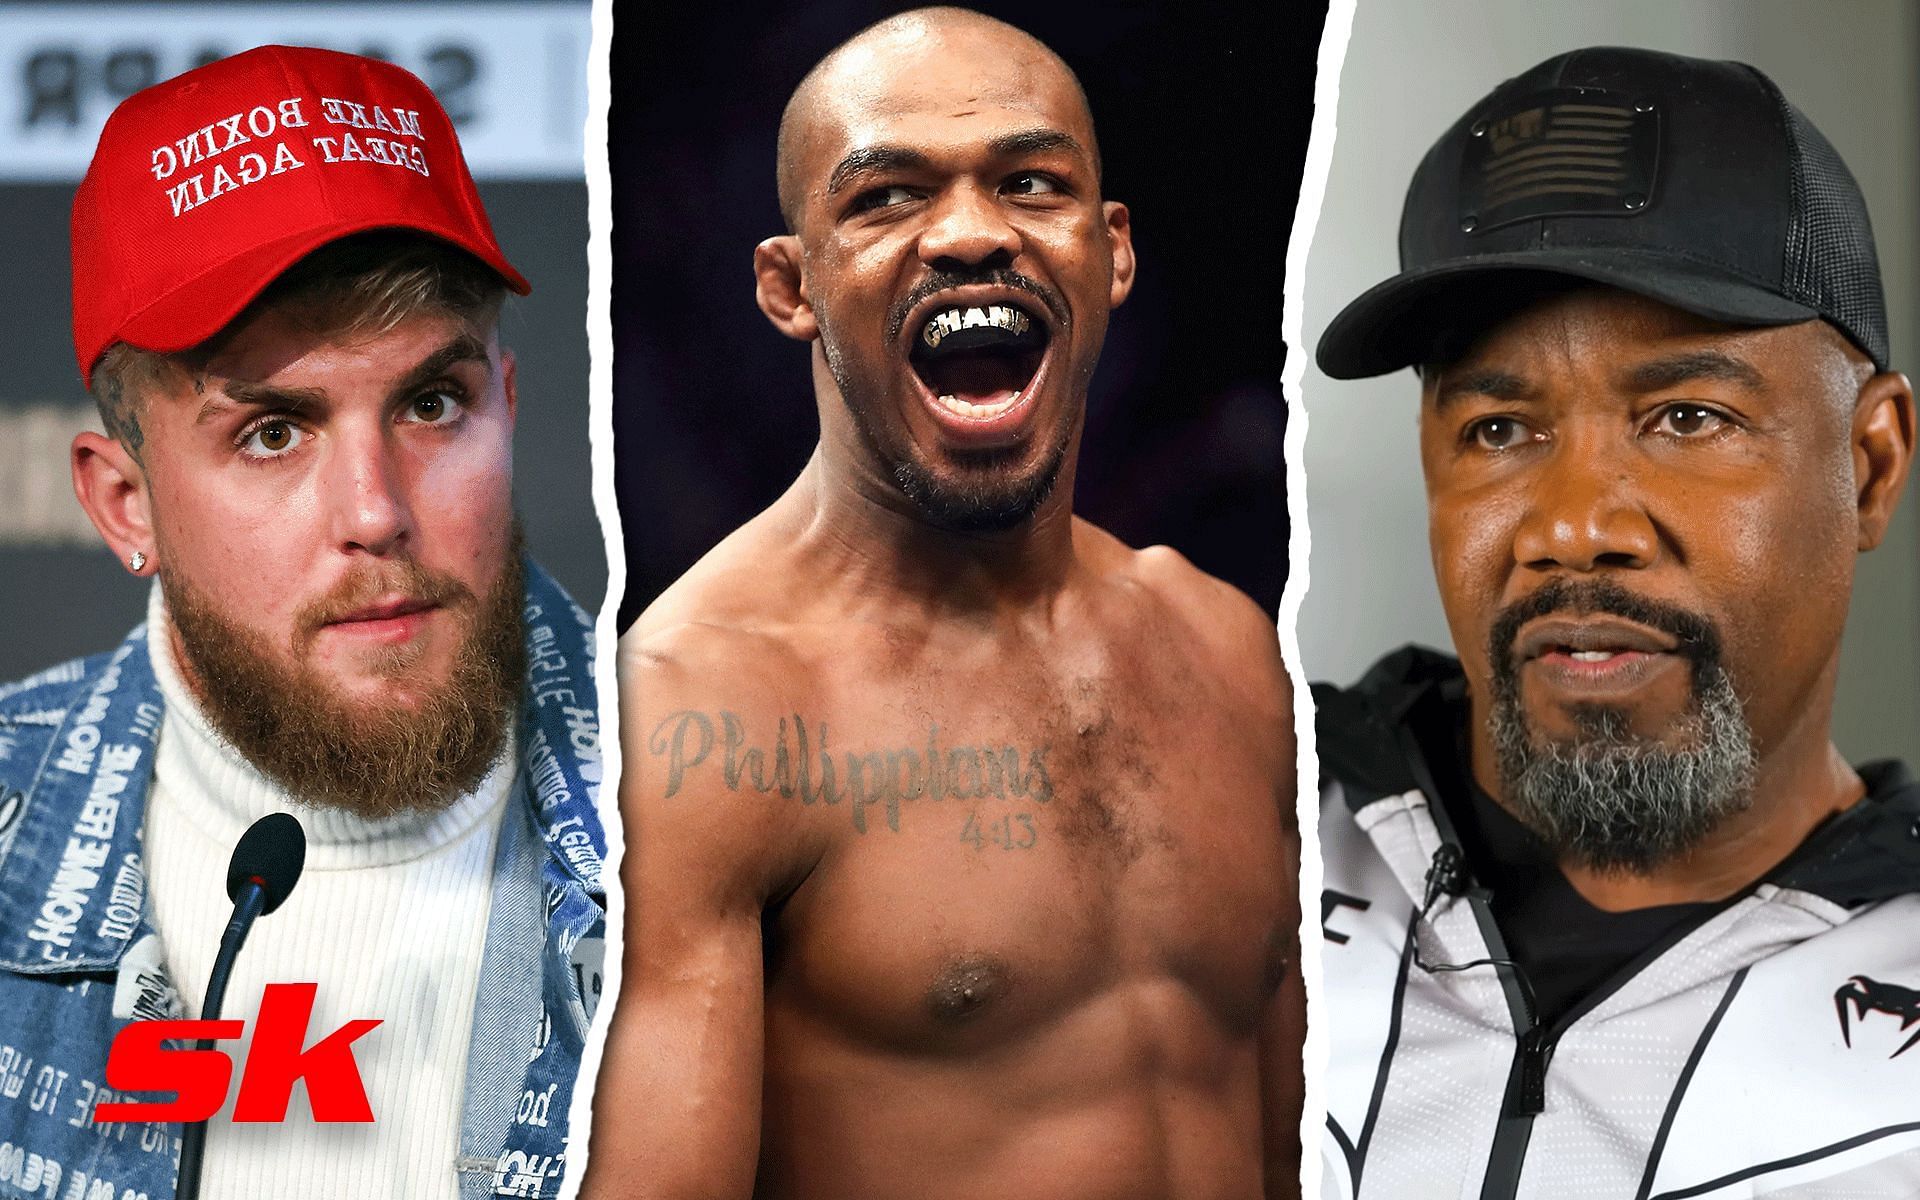 Hollywood star believes Jake Paul fighting Jon Jones would be a &quot;lopsided&quot; affair [Images via: djvlad on YouTube]